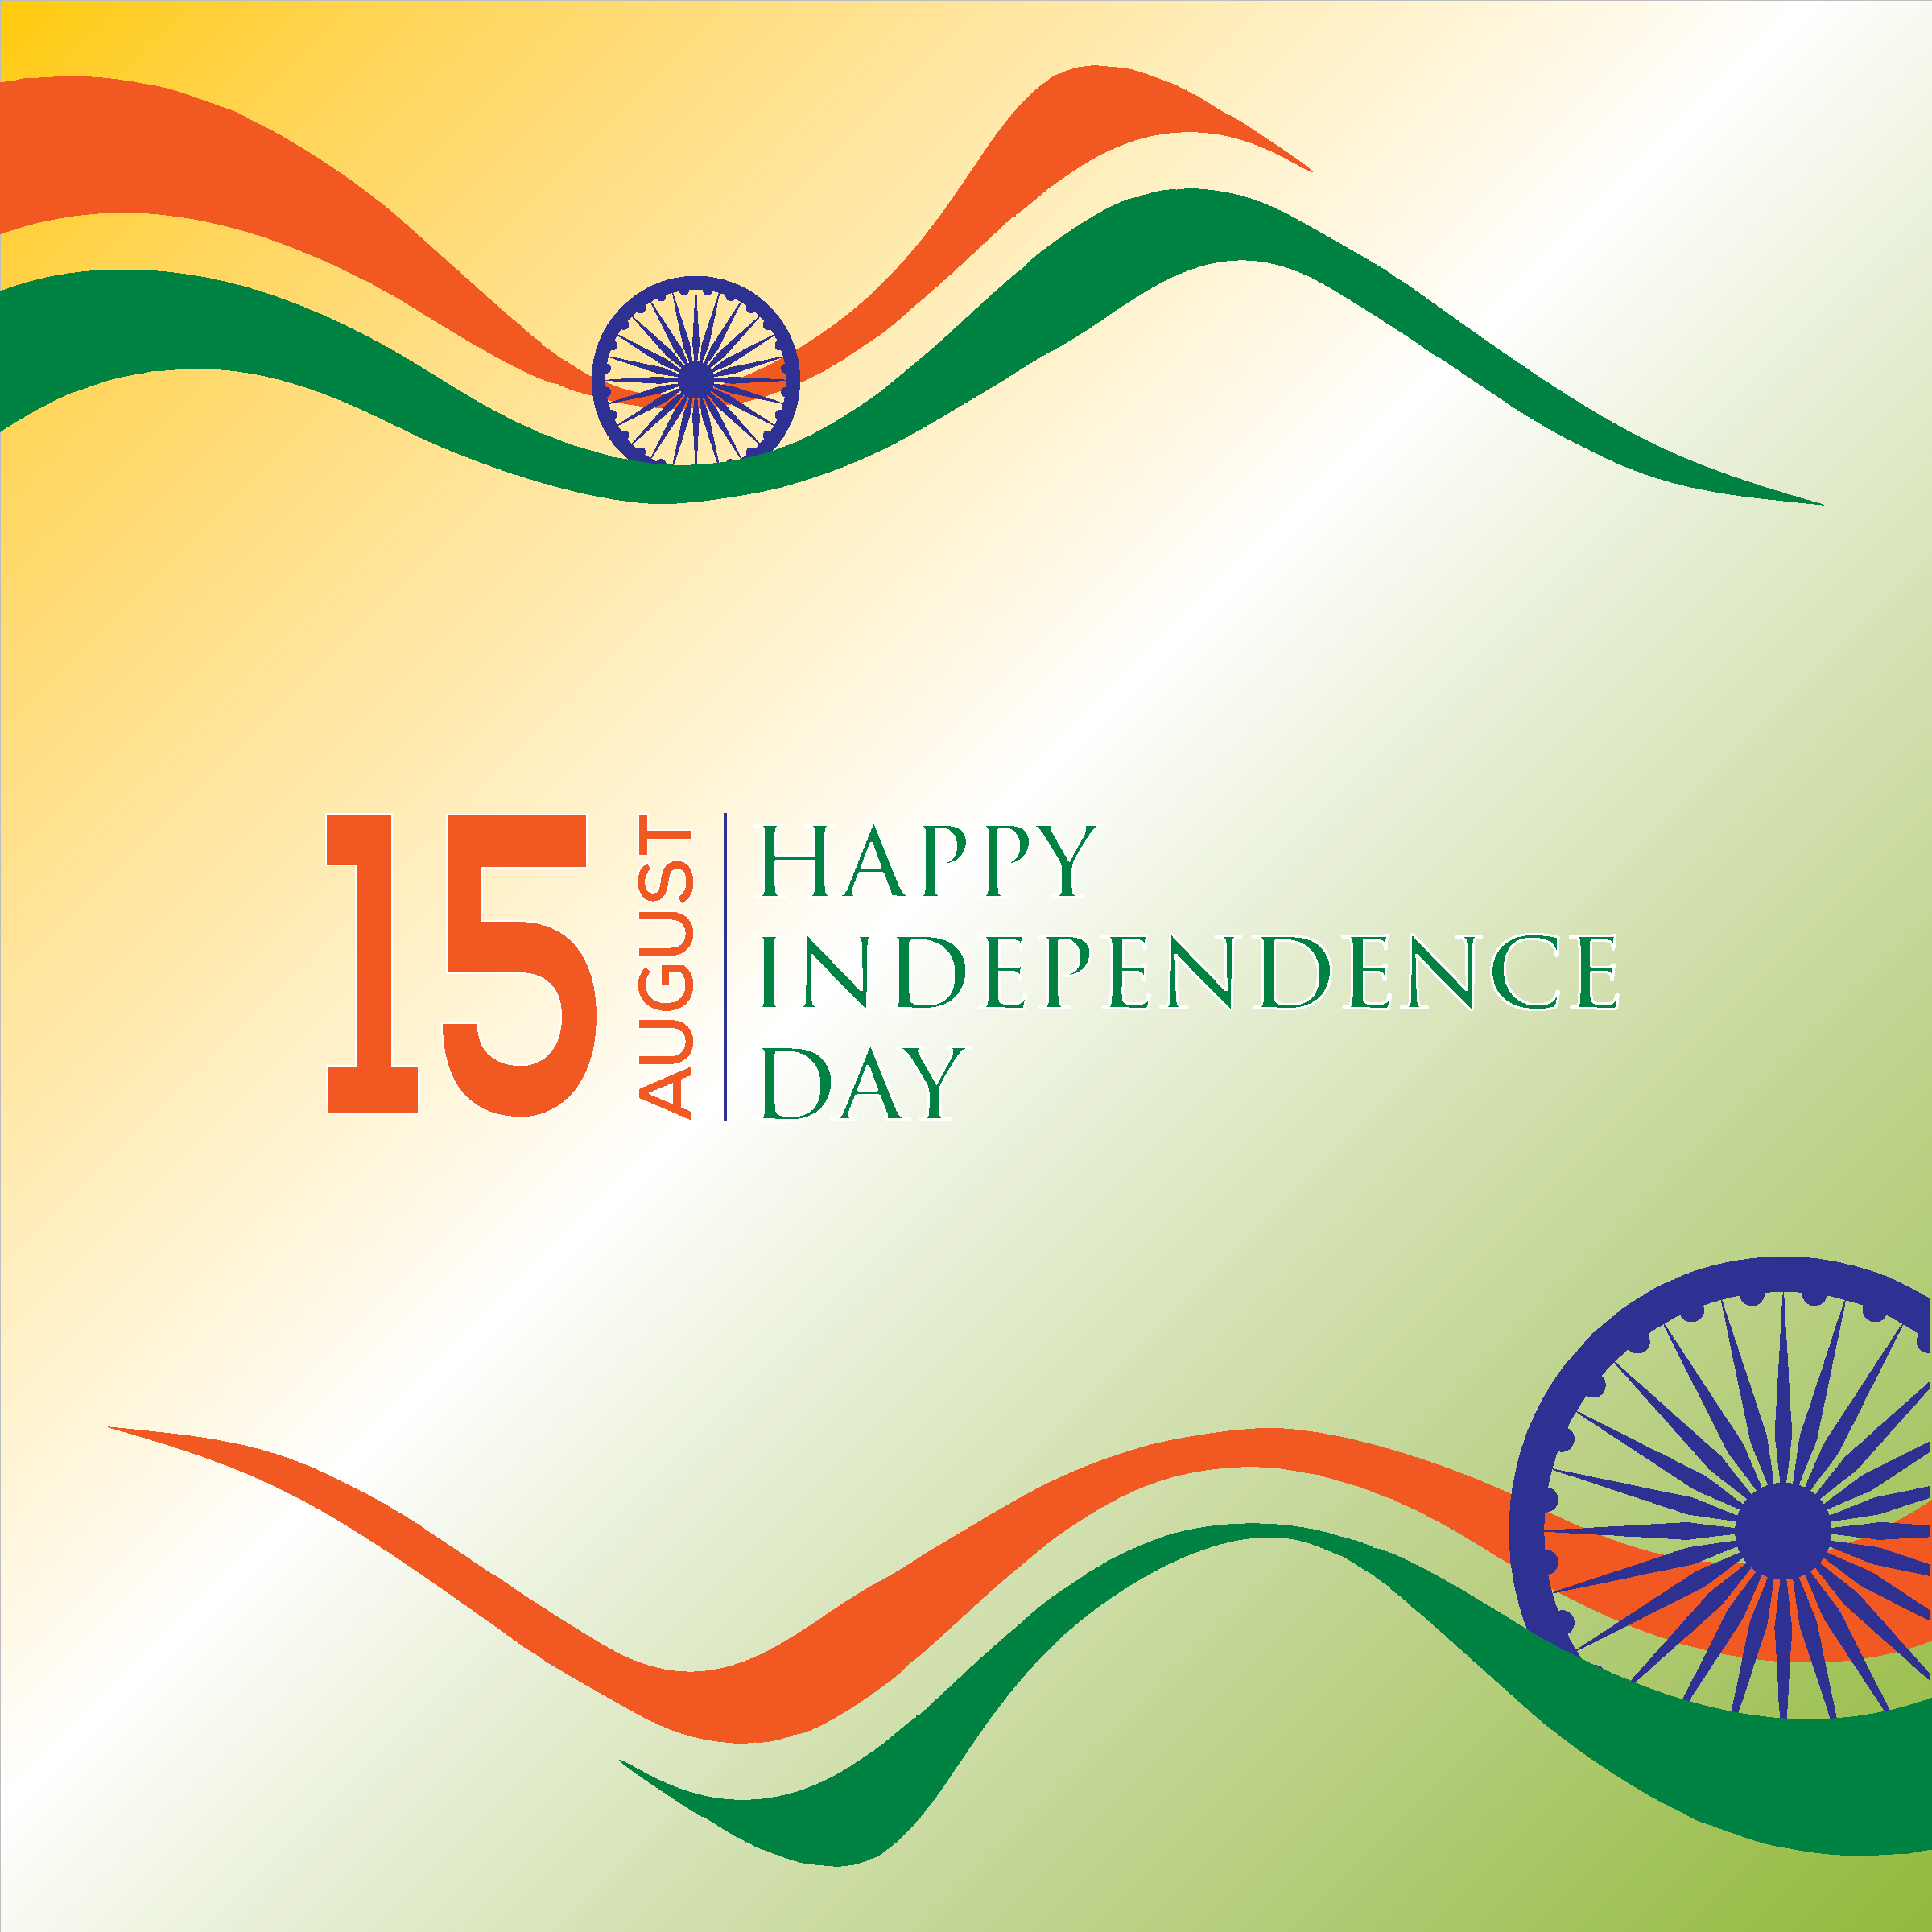 15th August Happy Independence Day Of India With Indian Flag Illustration Vector Free Vector 